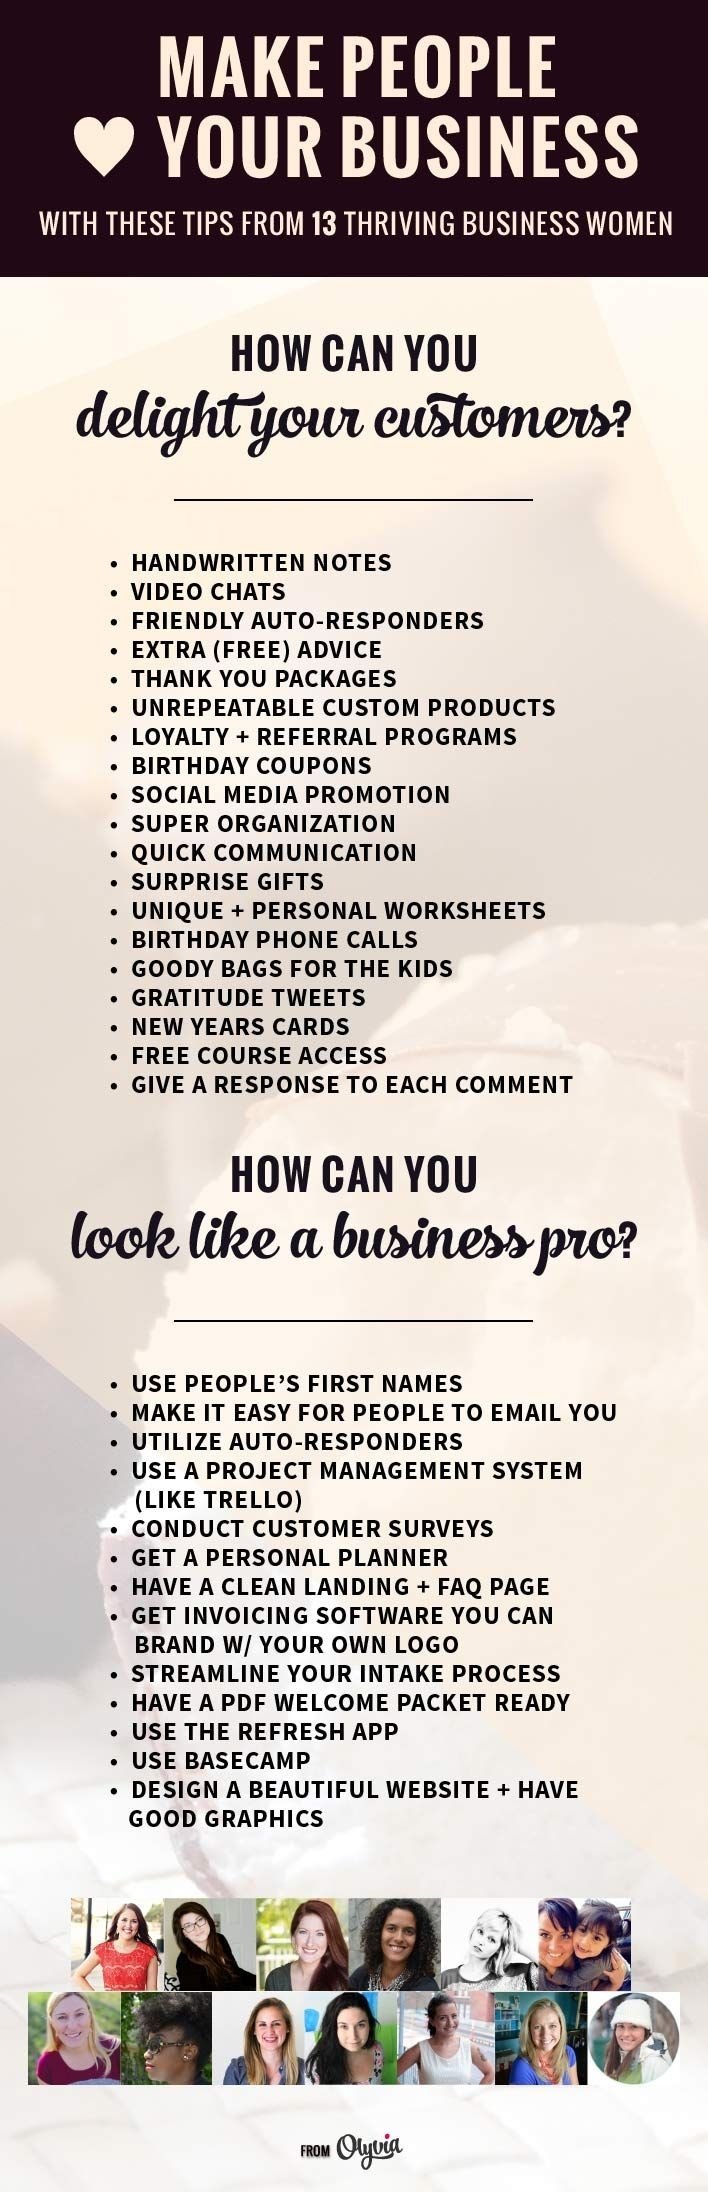 10 Pretty Small Business Start Up Ideas 192 best the start up images on pinterest business business 1 2022